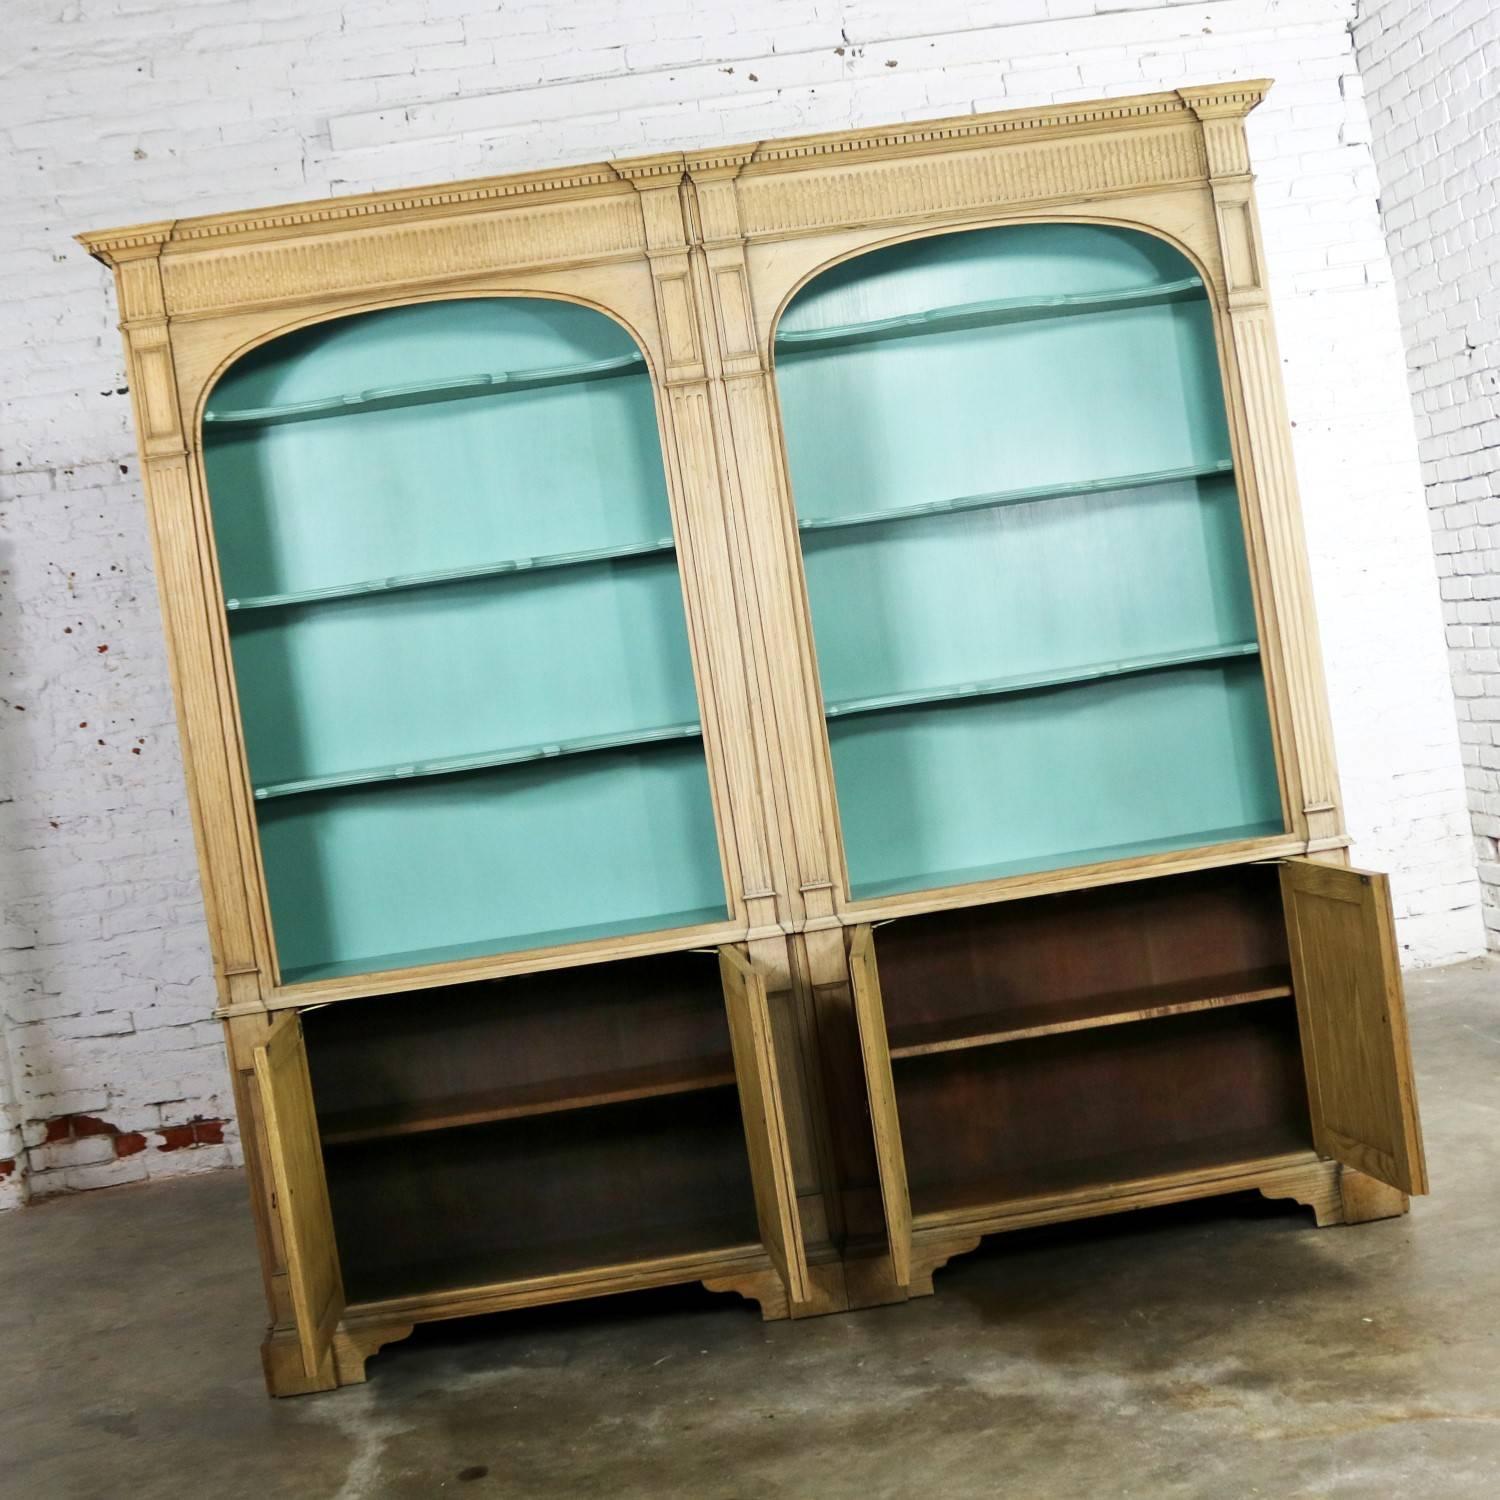 20th Century French Style Cerused Bookcases with Turquoise Interior by Baker Furniture